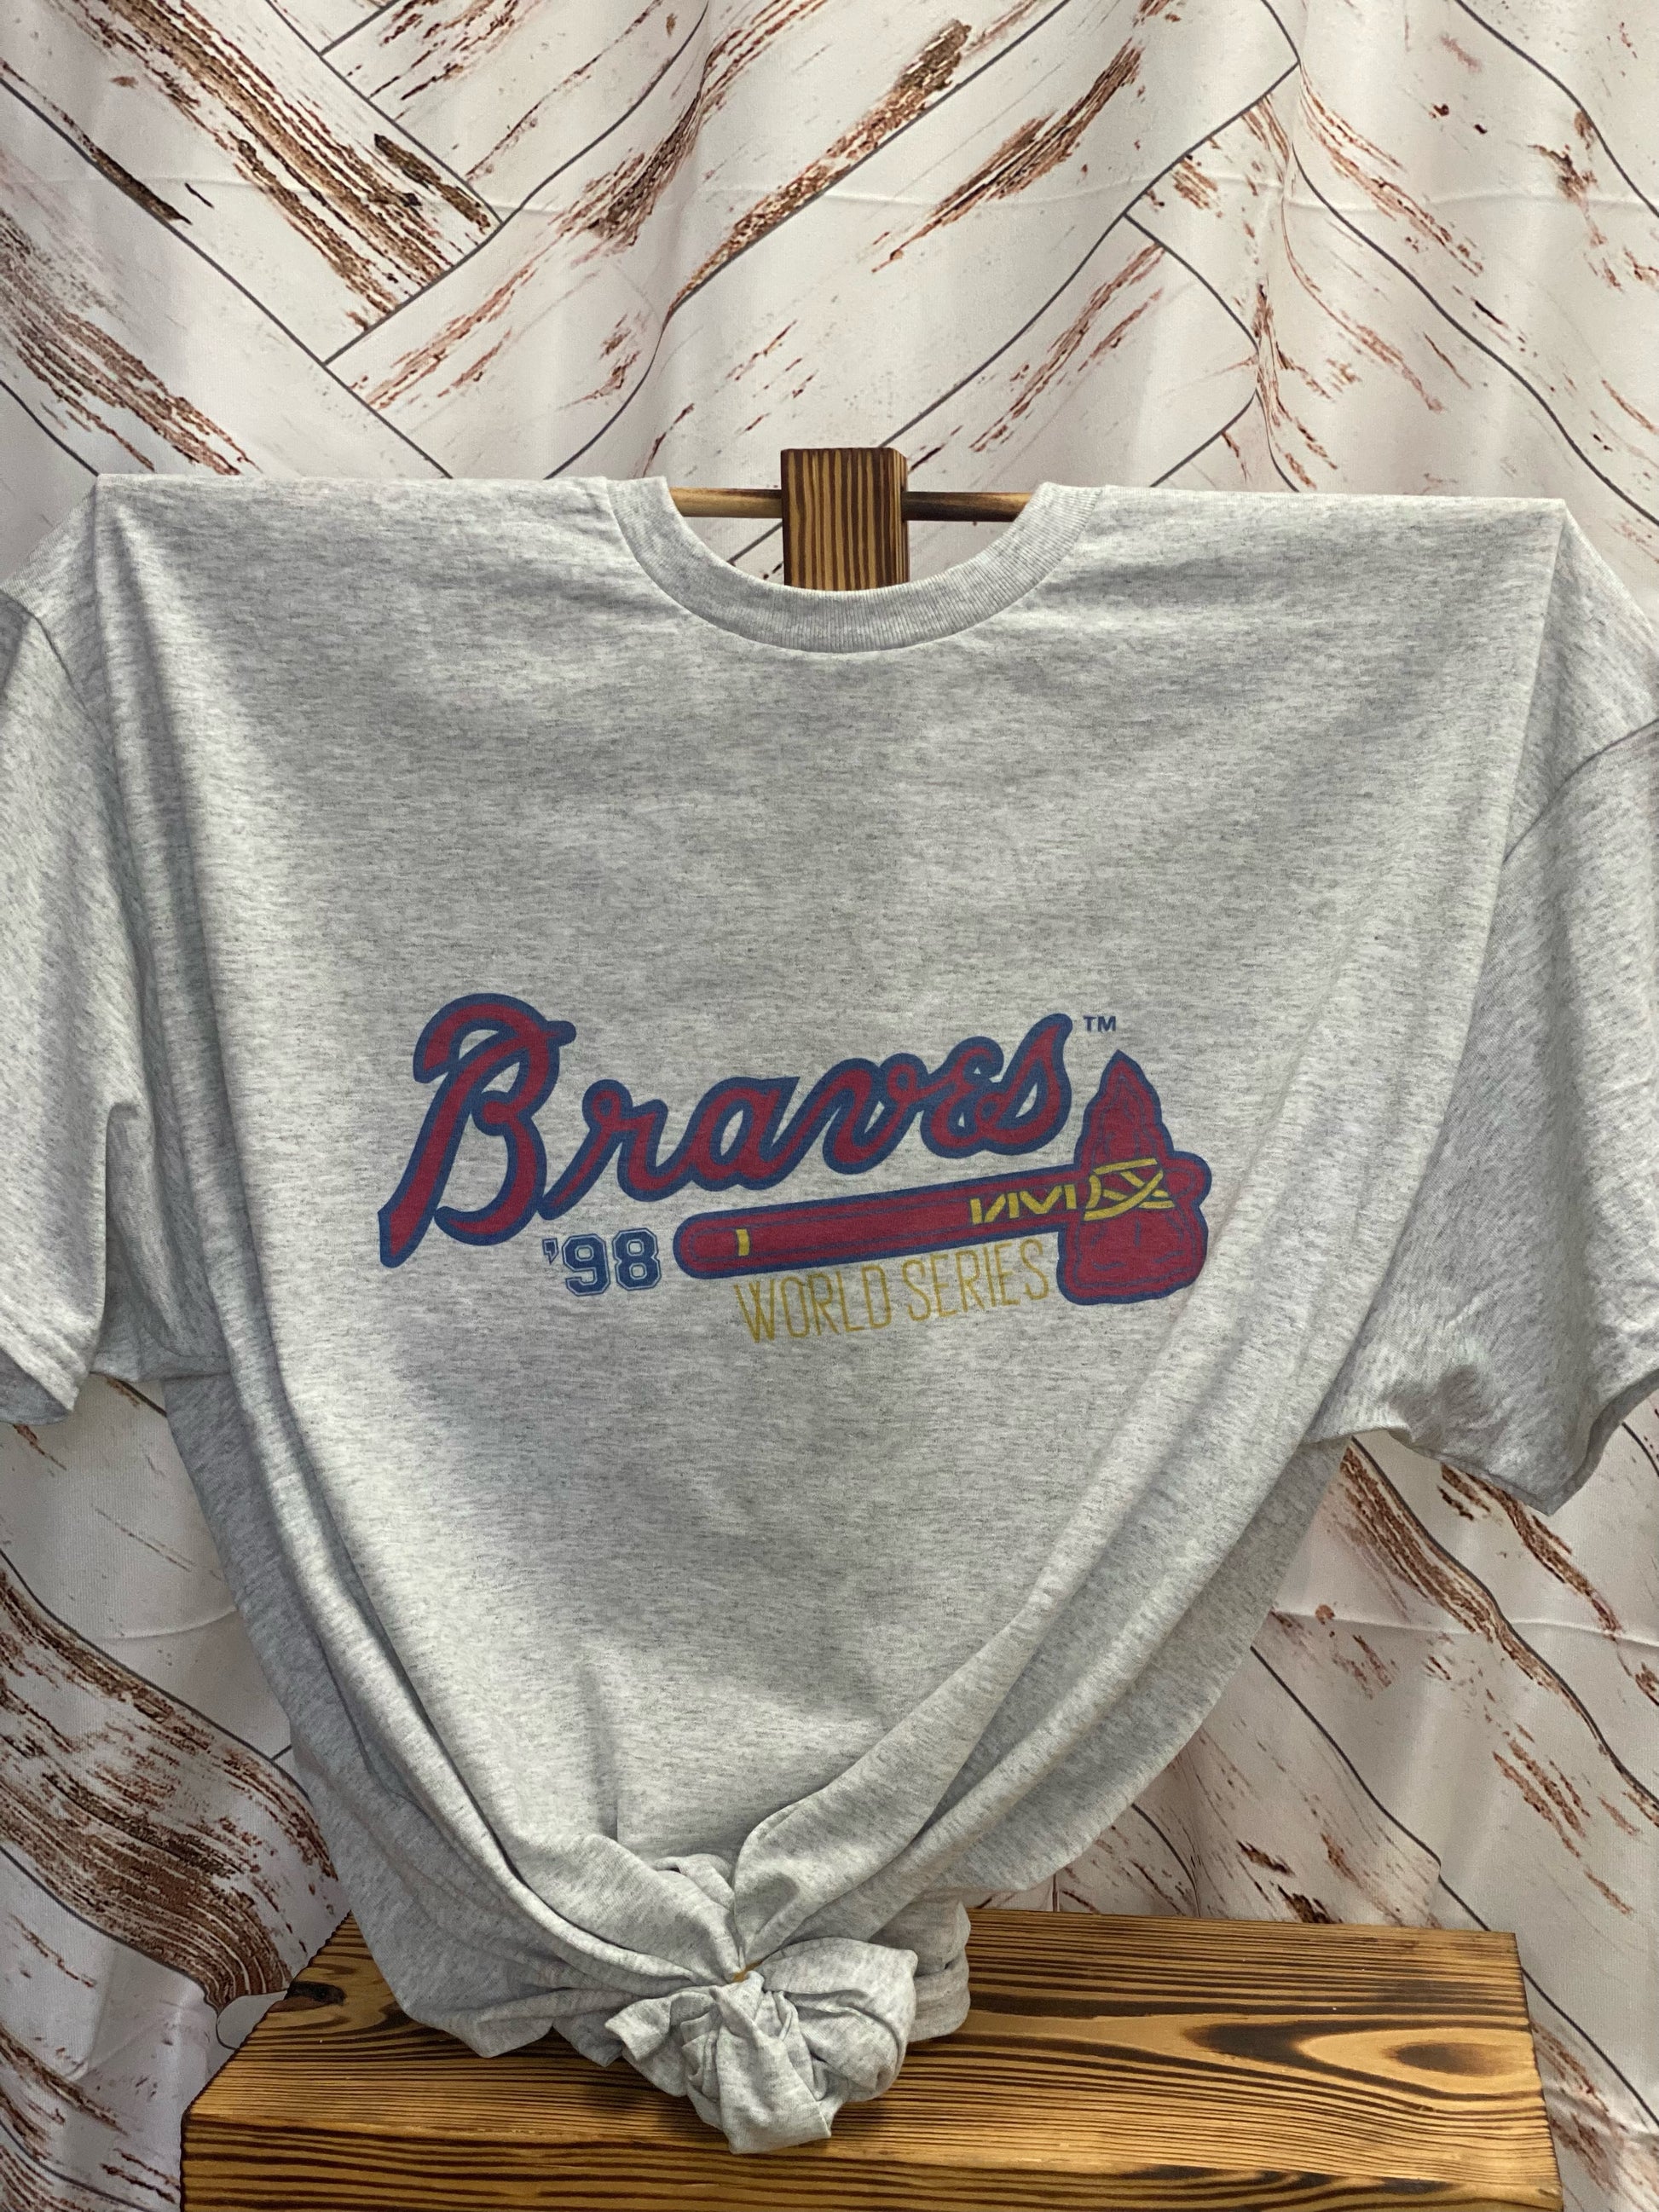 braves jersey youth xl